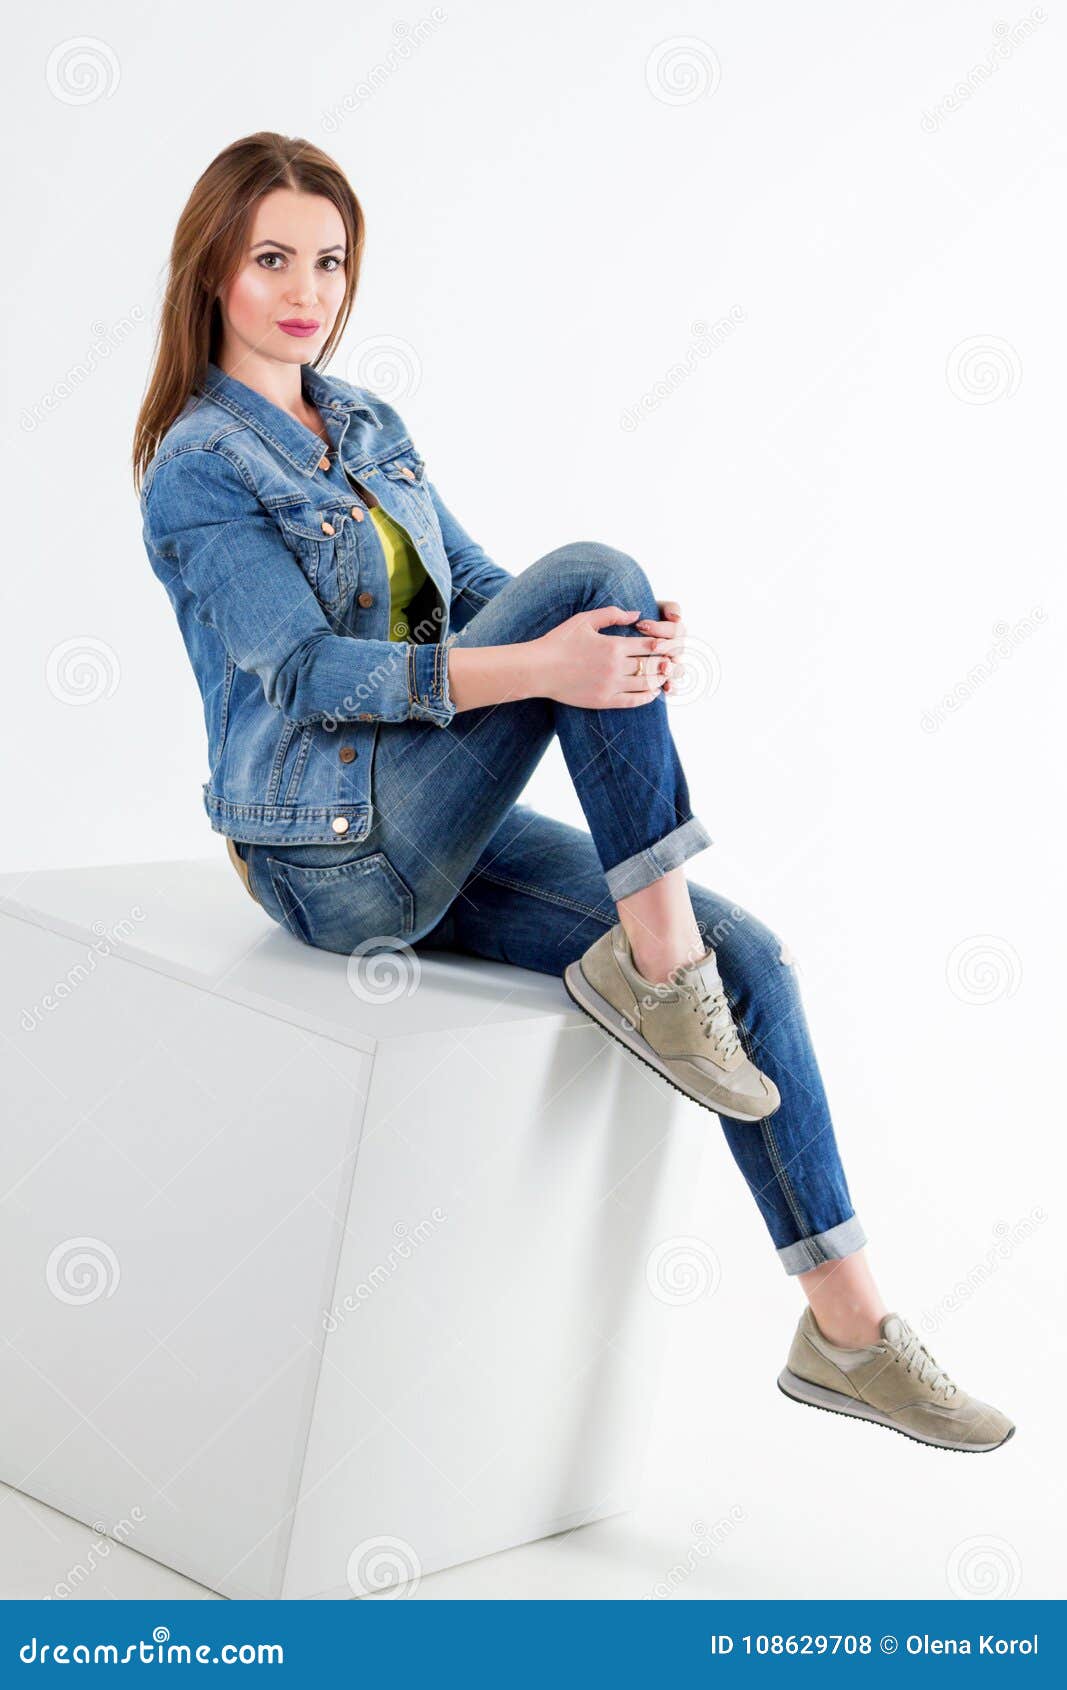 Studio Portrait of Beautiful Young Smiling Woman Wearing Blue Jeans and ...